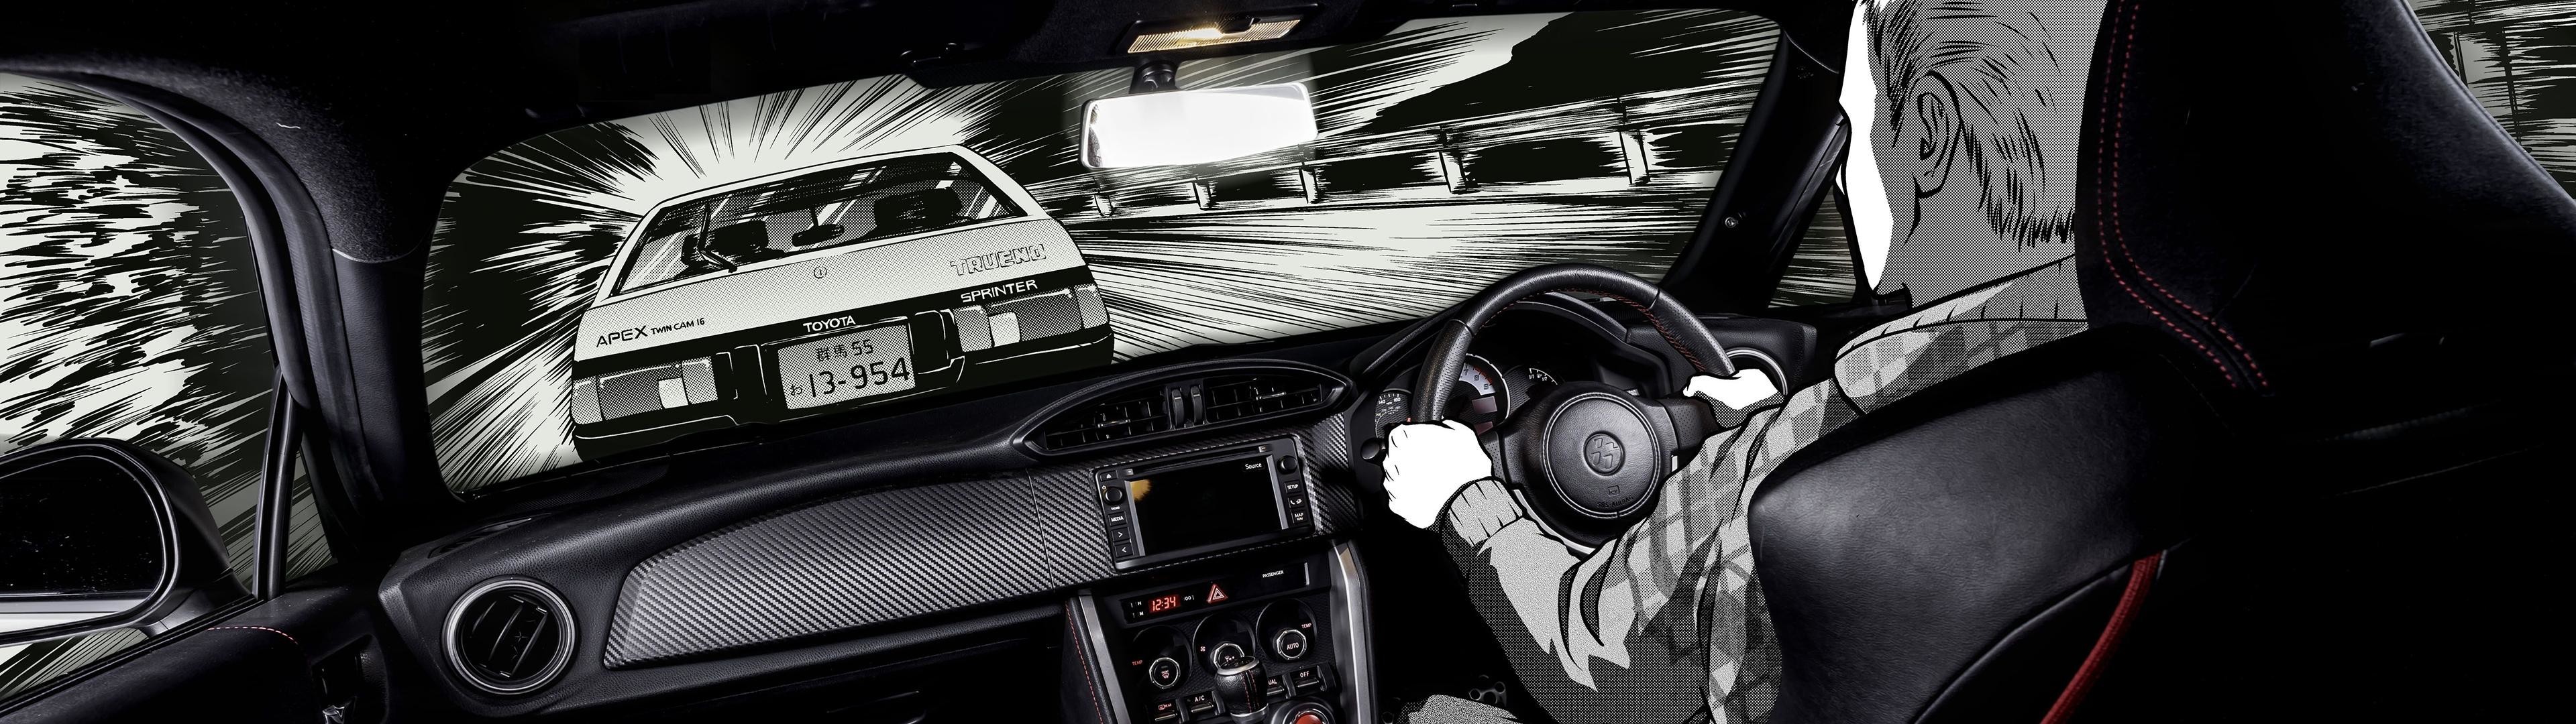 3840x1080 Initial D Images Hd Wallpapers Data Id Toyota 86 Initial D Interior 3840x1080 Wallpaper Teahub Io